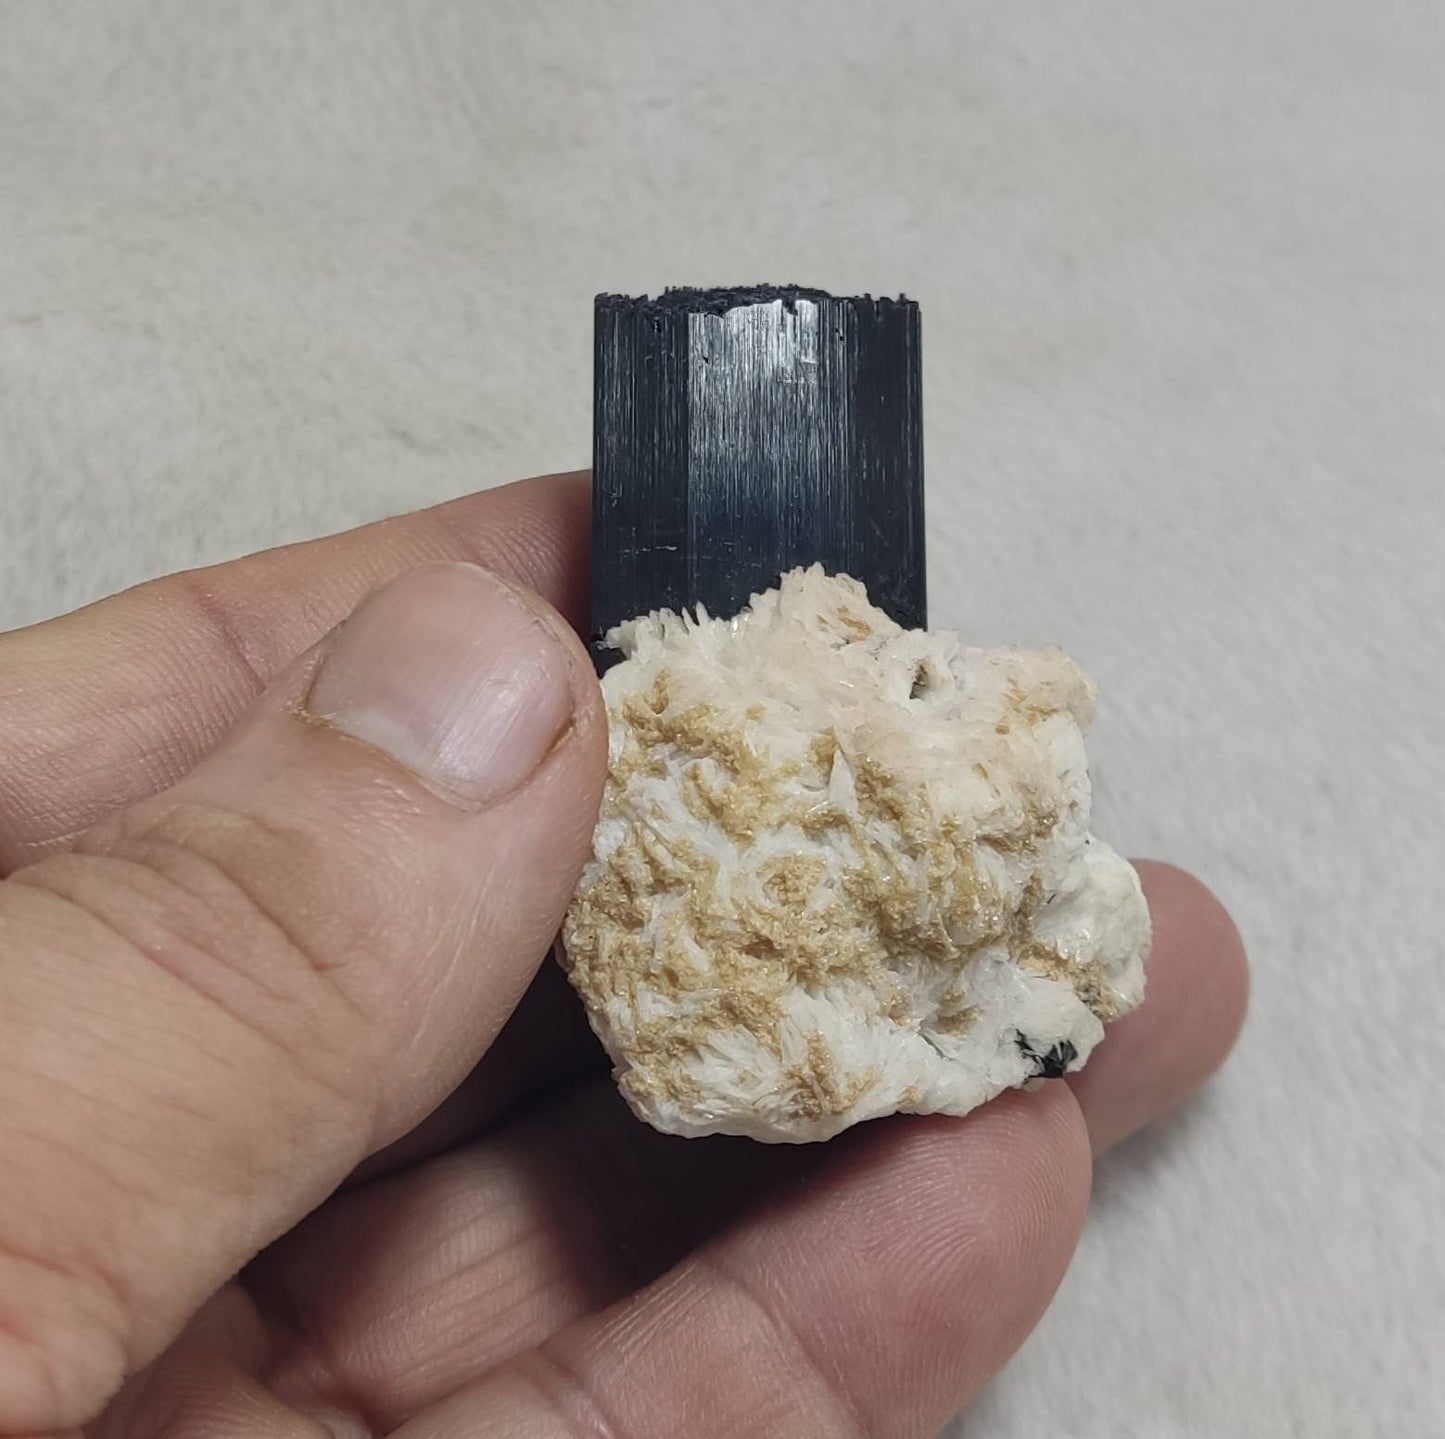 An Aesthetic Natural Tourmaline crystals with Albite attachment 74 grams